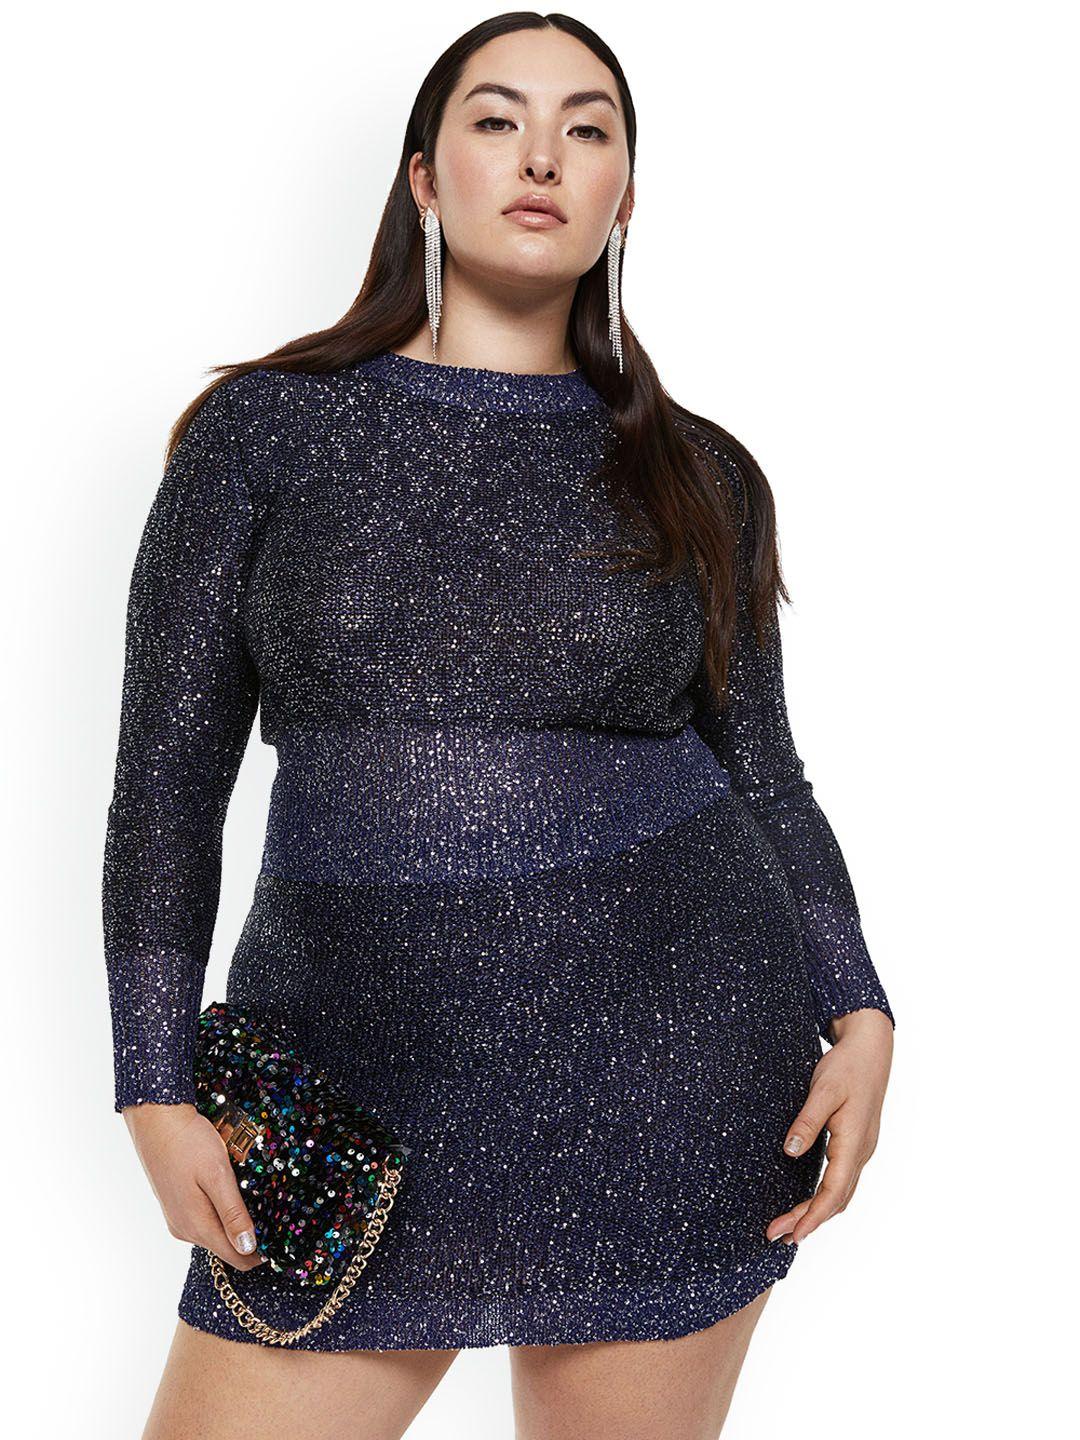 h&m women plus size sequined skirt